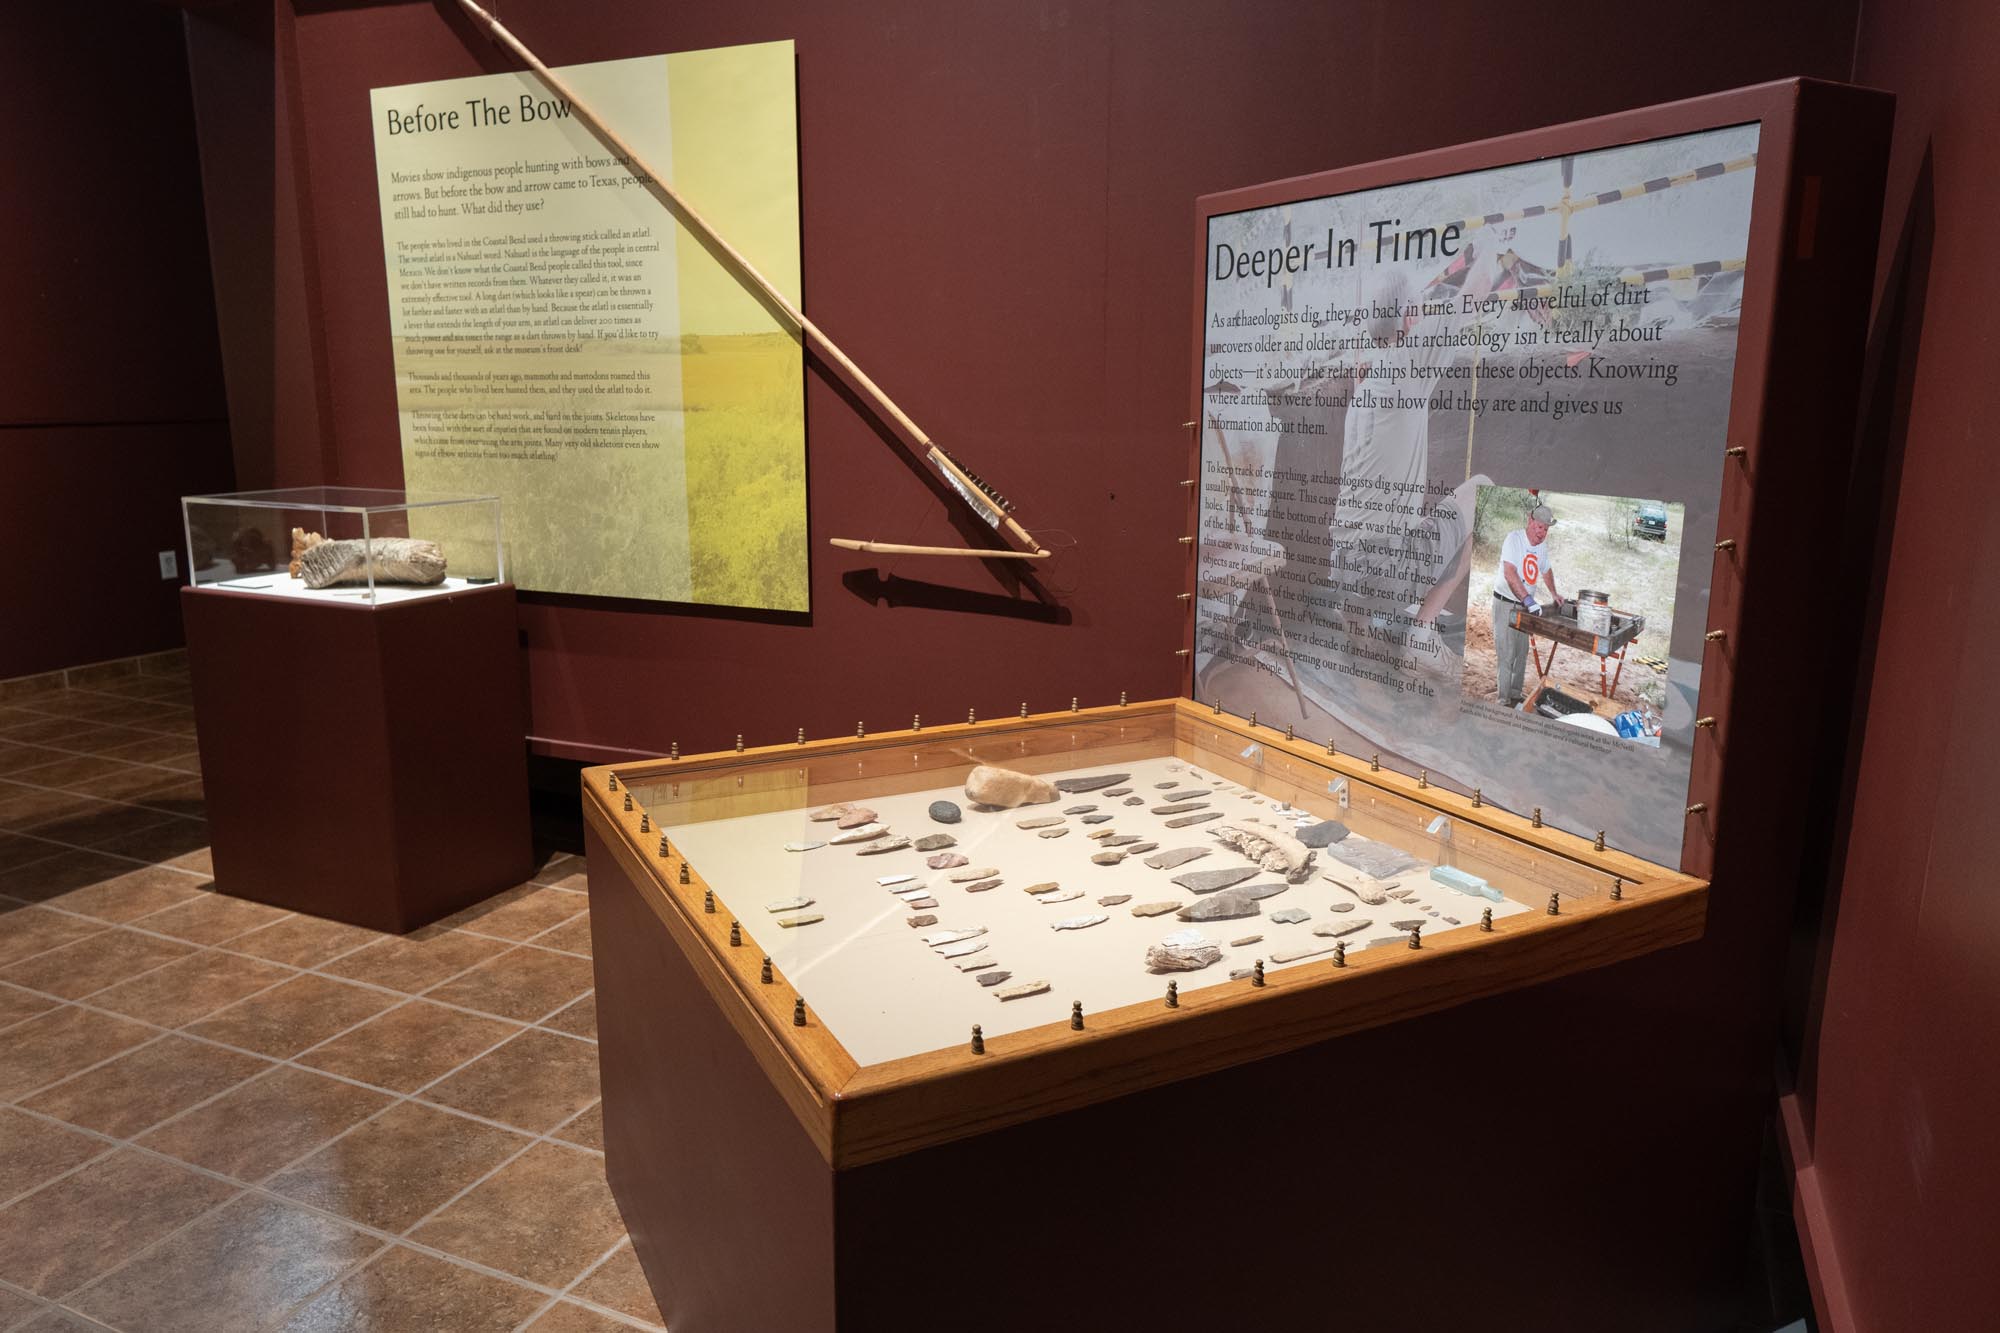 Evidence of over 9,000 years of continuous occupation at the McNeill Ranch Site can be viewed in the museum